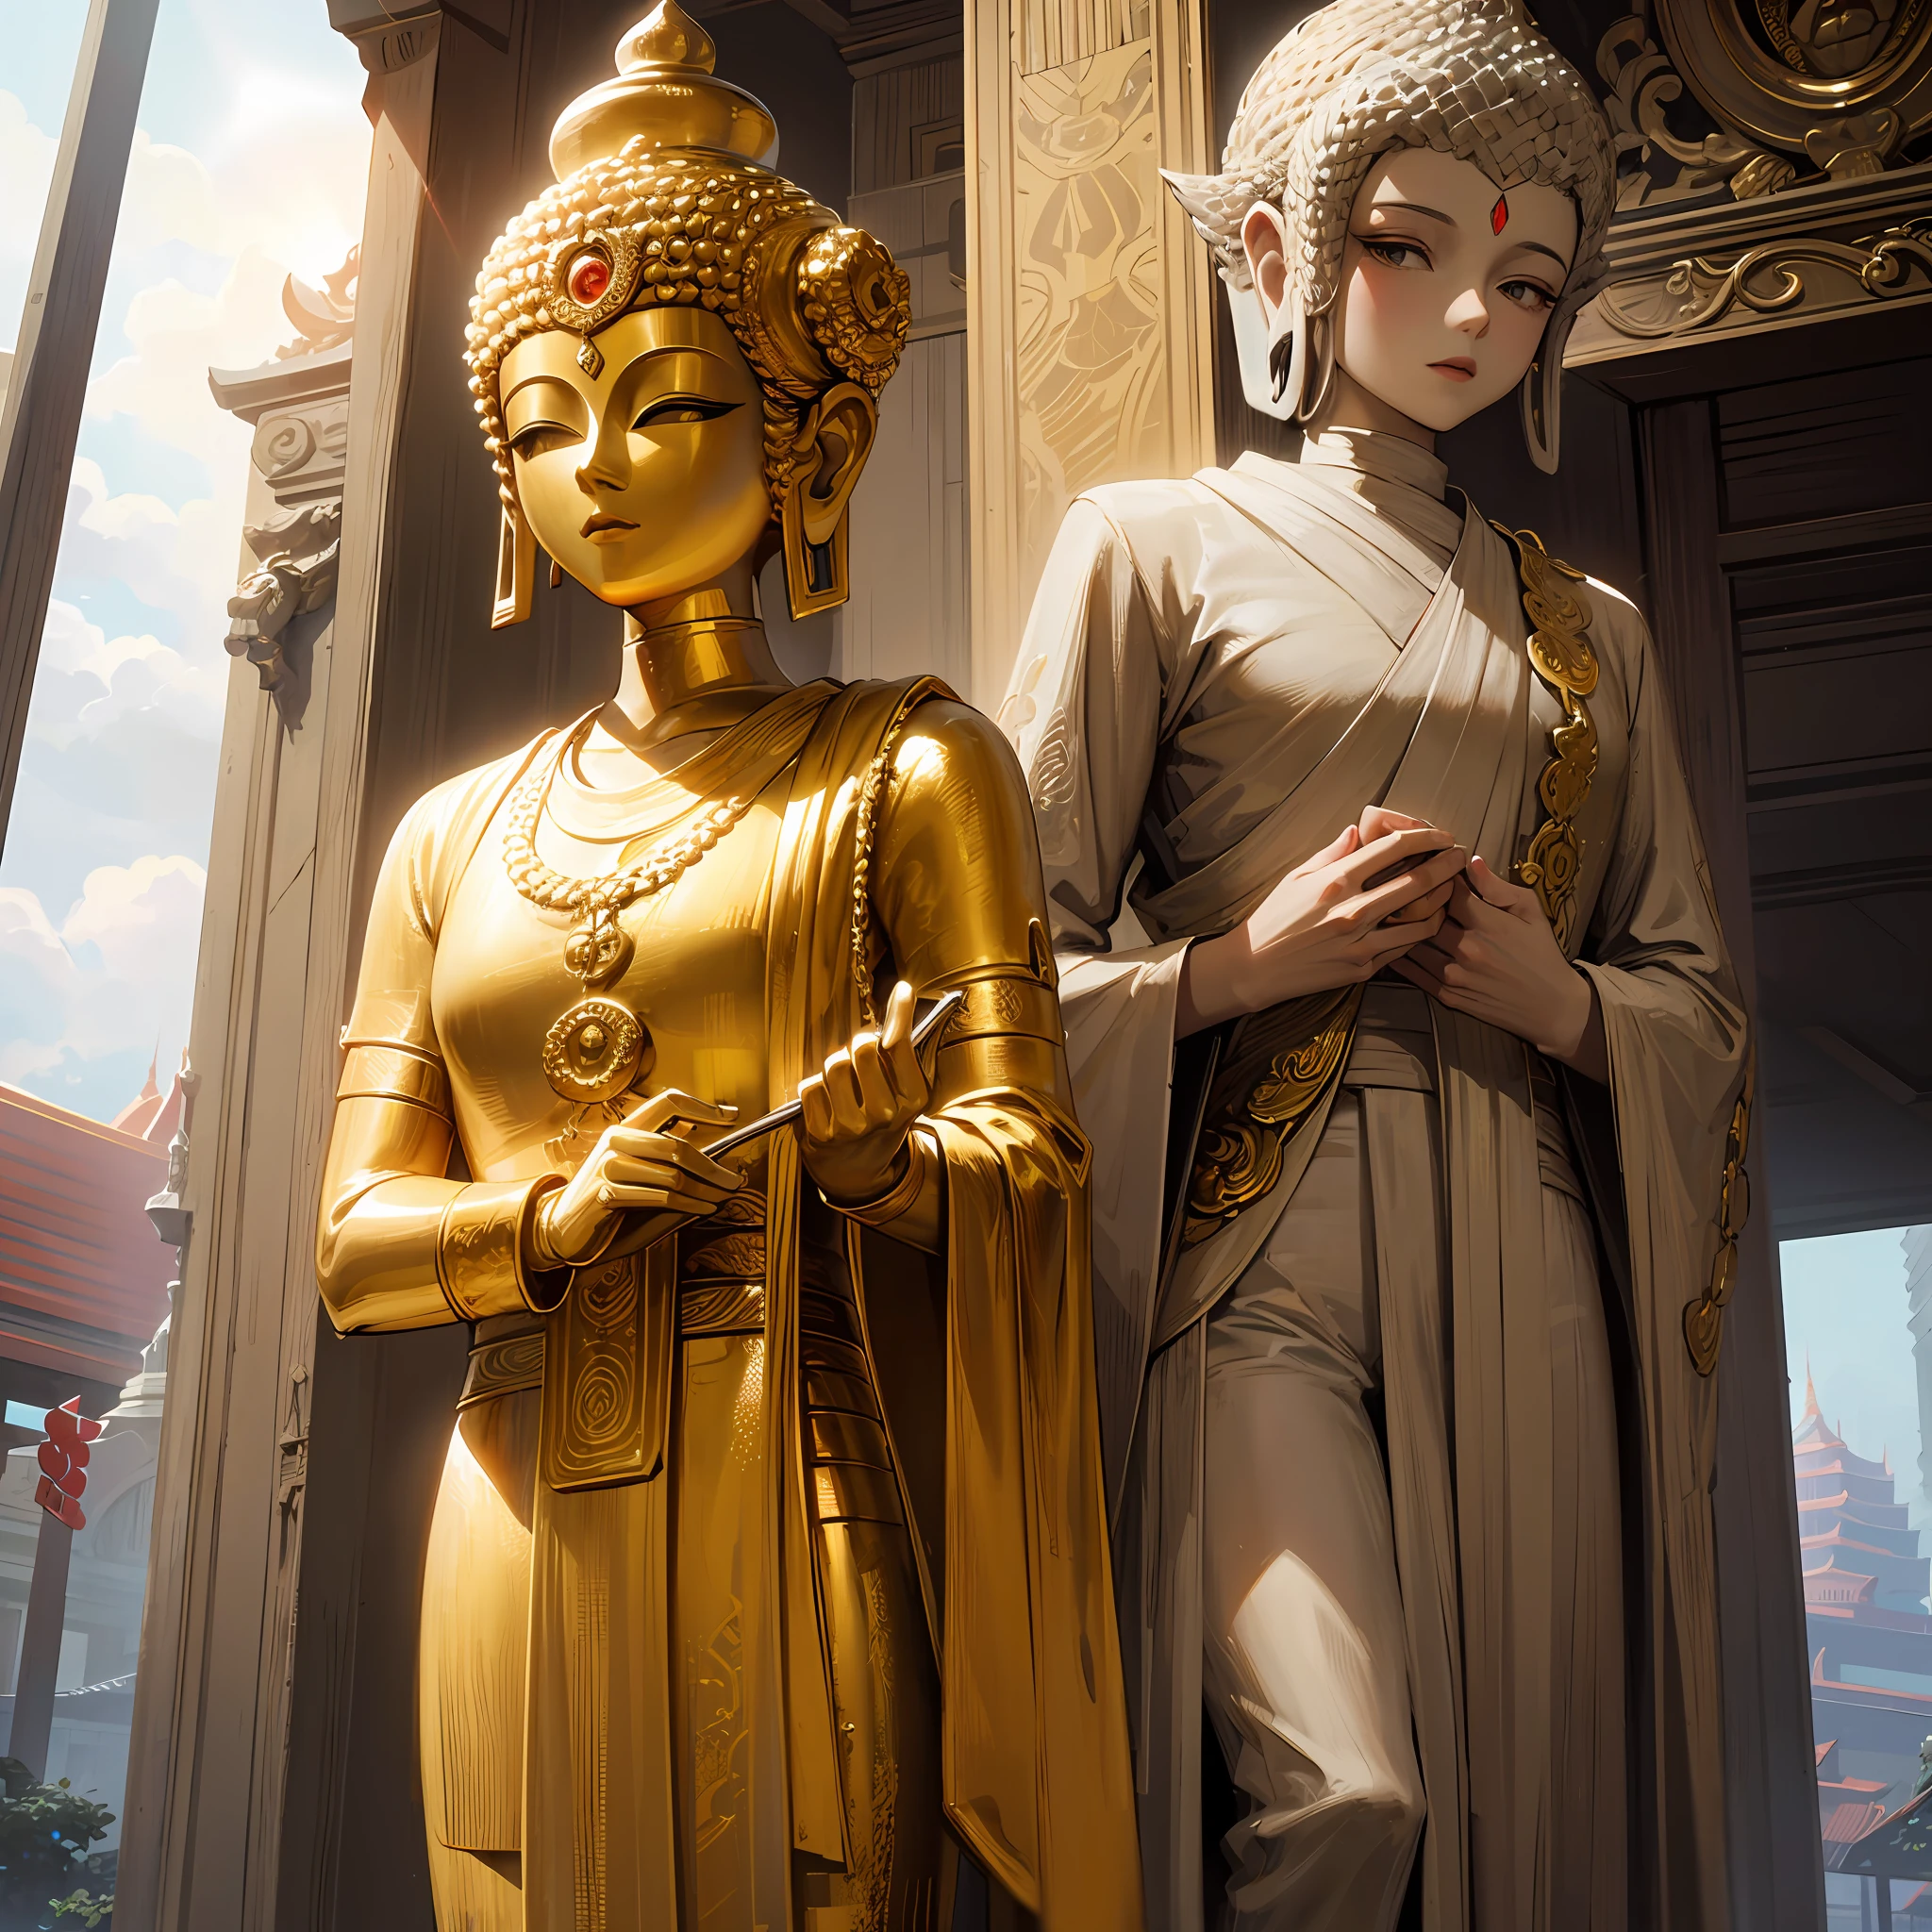 there is a statue of a golden Snake on top of a building, a Buddhist Buddha, taken with sony alpha 9, taken with a Sony A7R camera, a statue, Photo taken with Sony A7R, Buddha, Photo taken with Sony a7R camera, taken with sigma 2 0 mm f 1. 4, Beautiful image, thai temple, statue, dark milky way at the background, stunn, surrealism, Cinematic lighting, god light, back lit lighting, Textured skin, Super detail, (allure: 1.2),